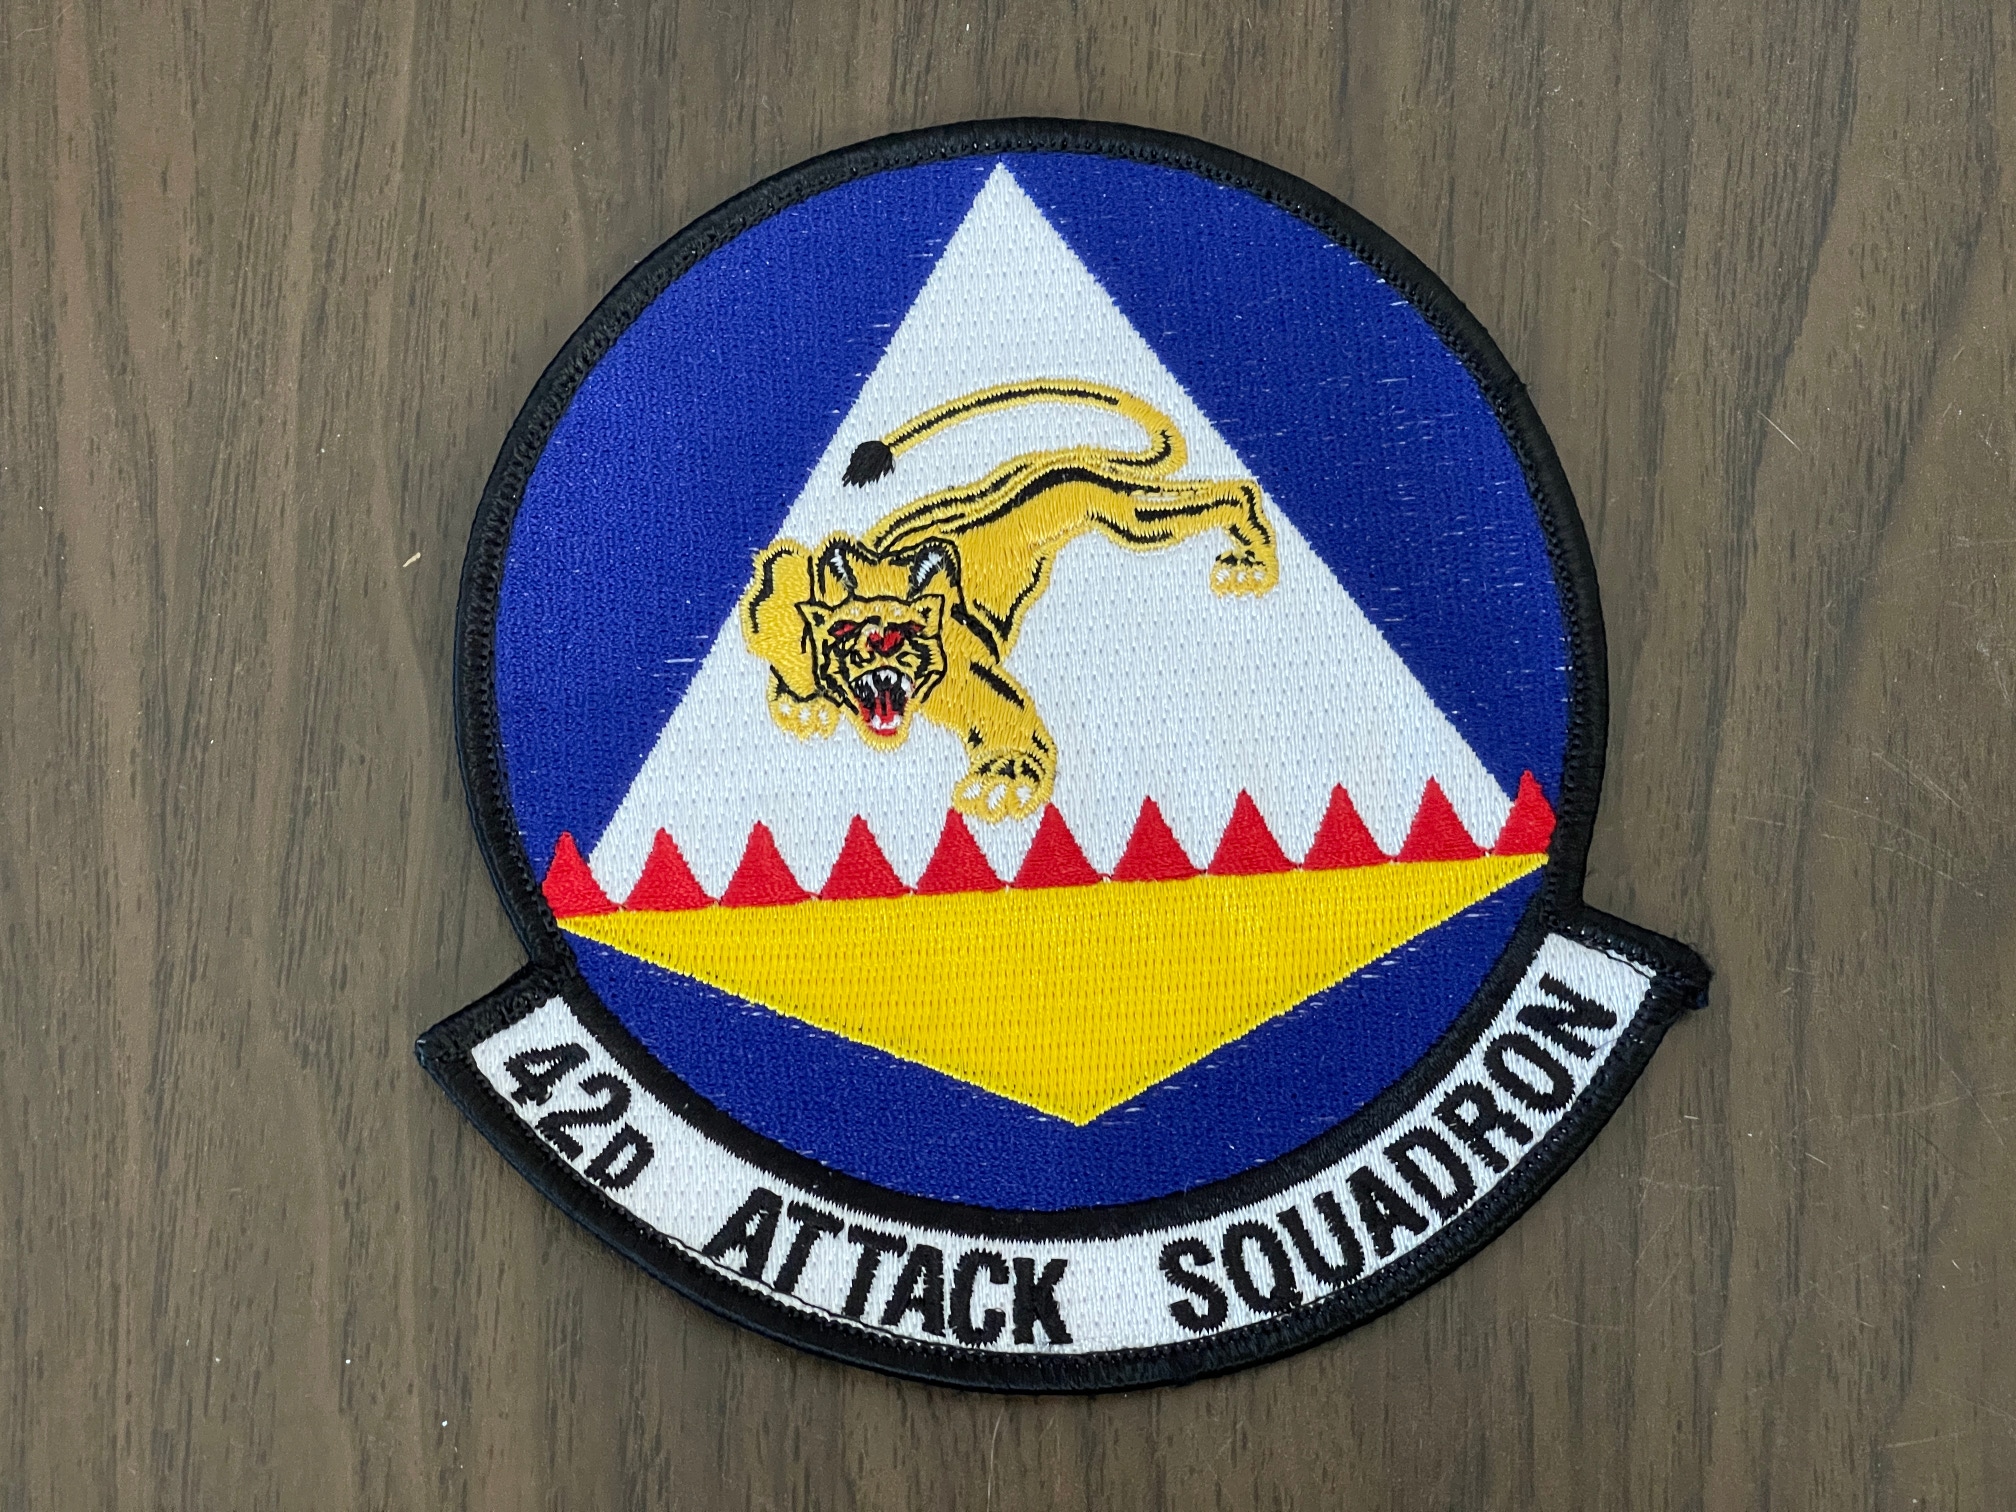 Air Force USAF 42nd ATTACK SQUADRON CREECH AIR FORCE BASE NV Collectible Patch!